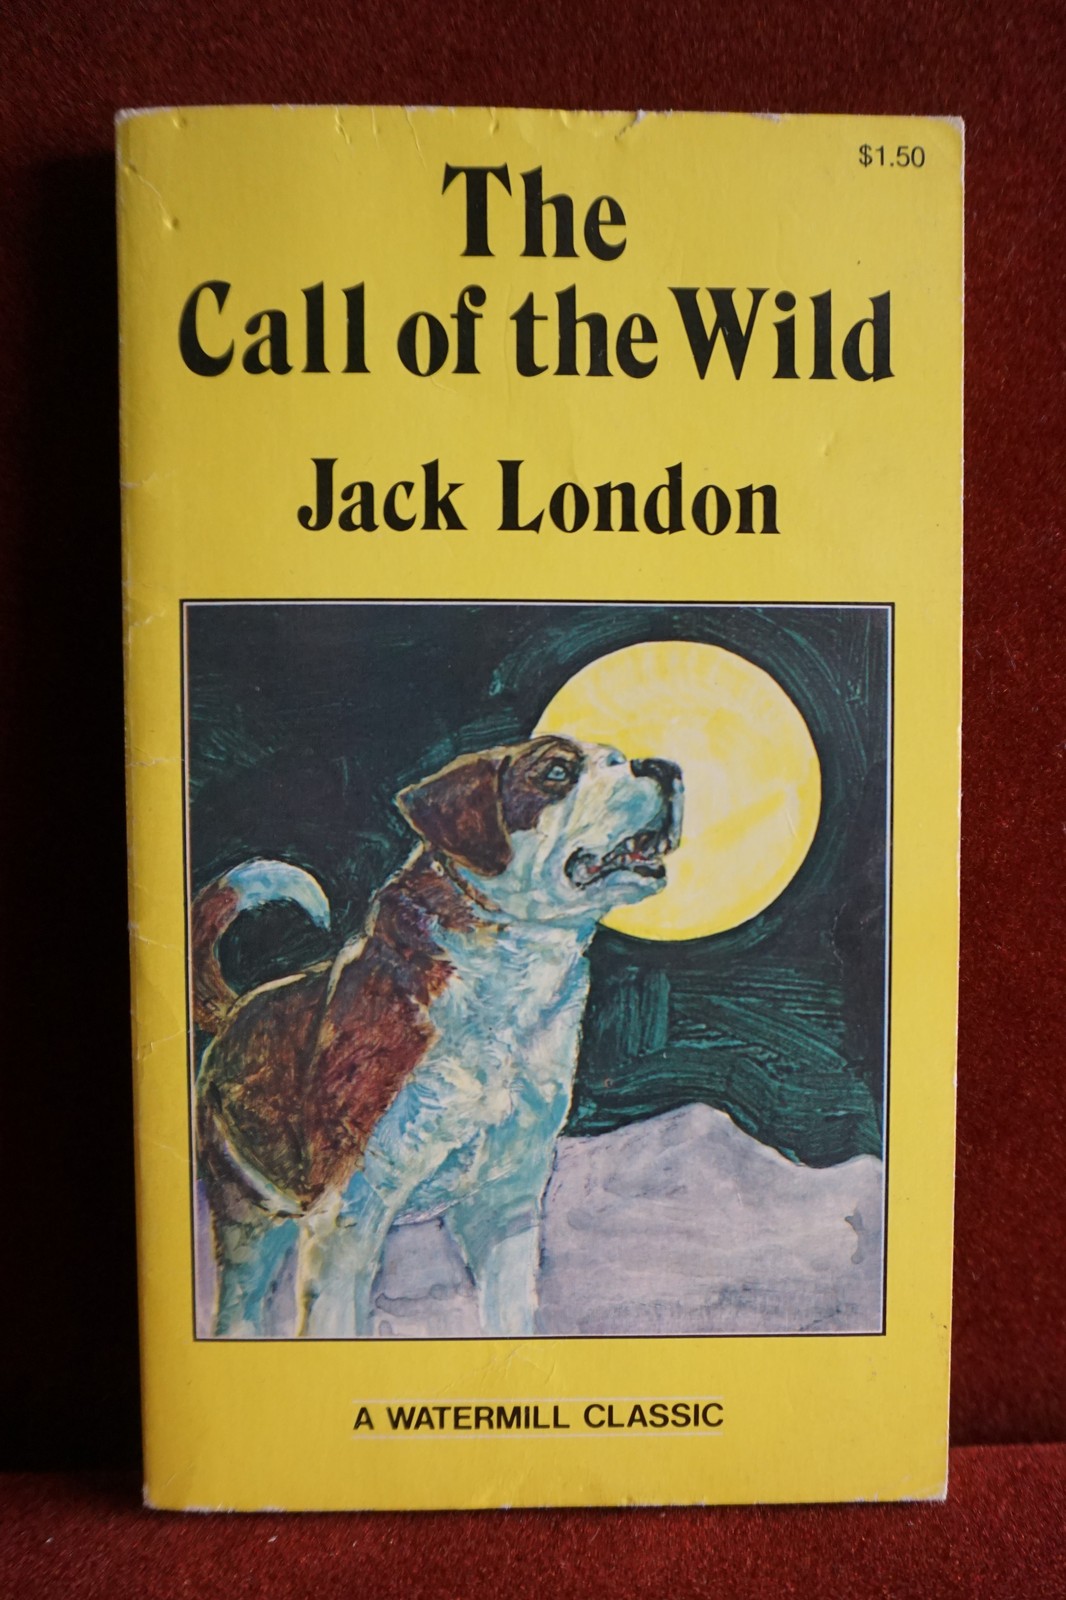 Adaptation In Jack Londons The Call Of The Wild